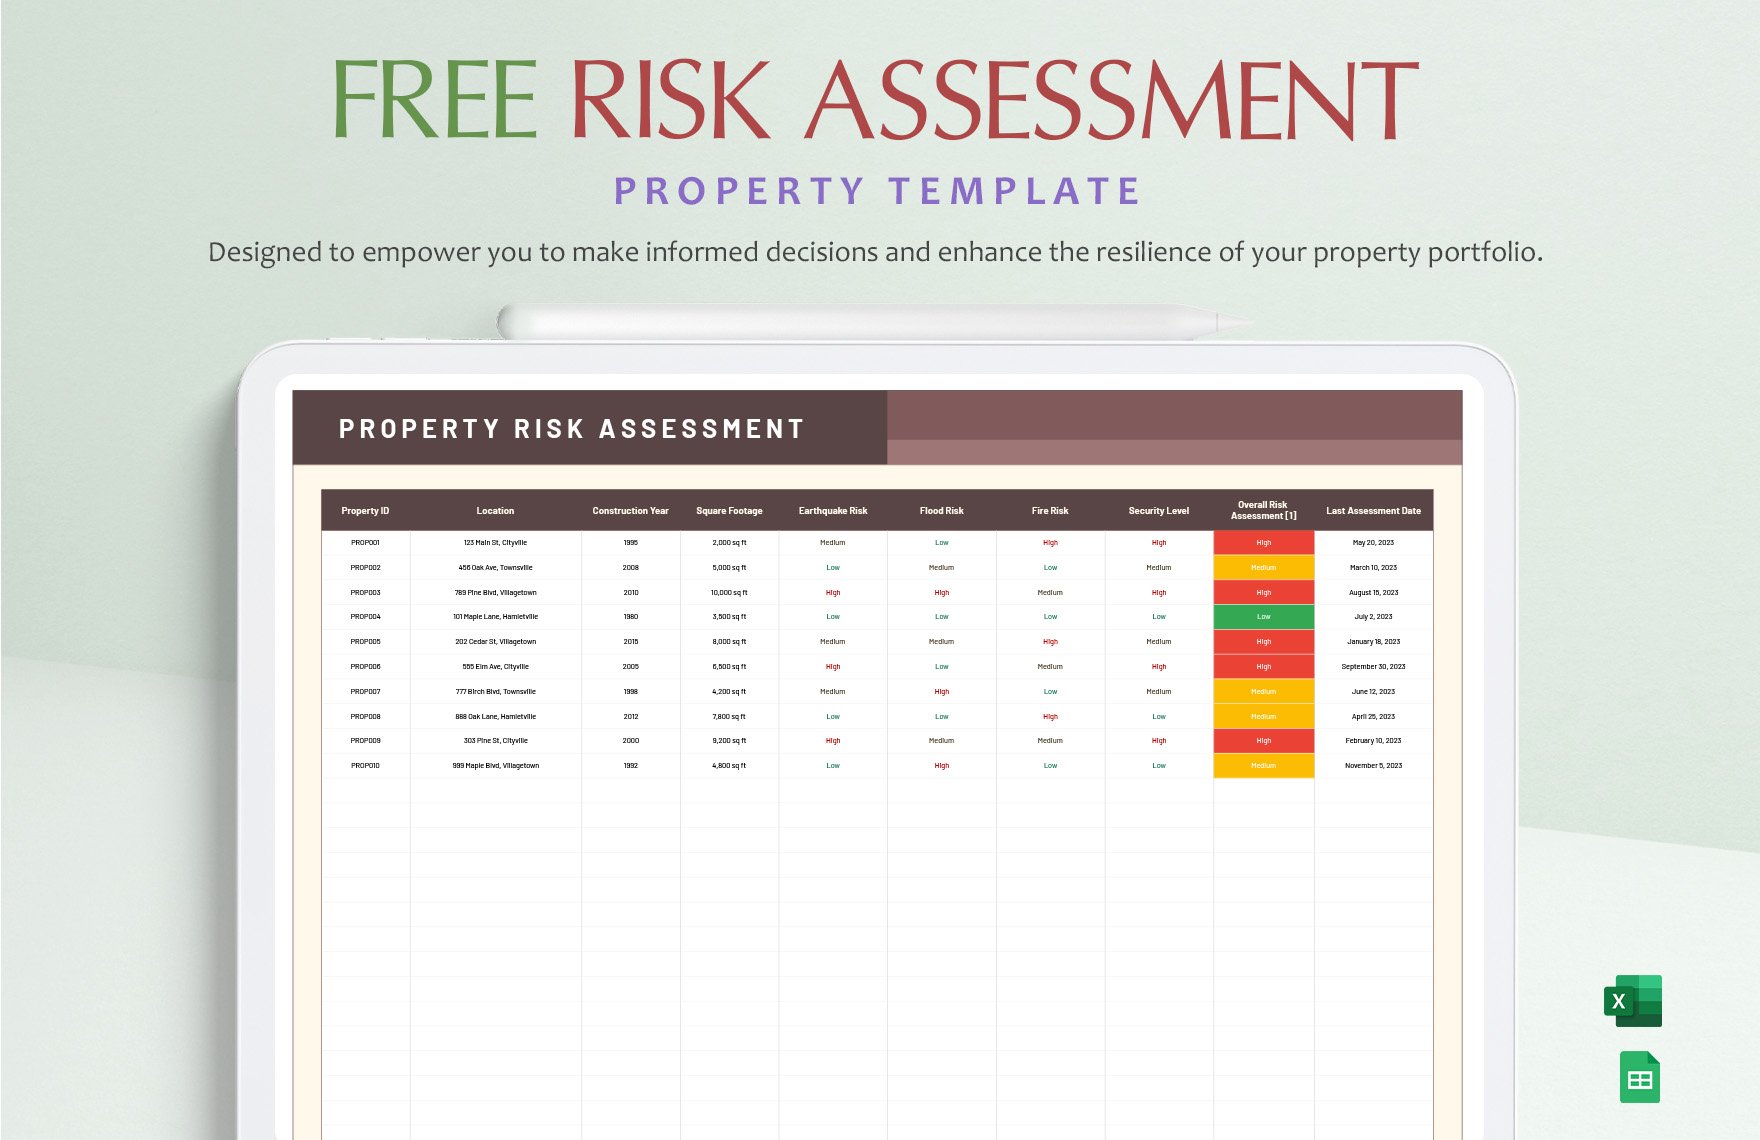 Free Risk Assessment Property Template